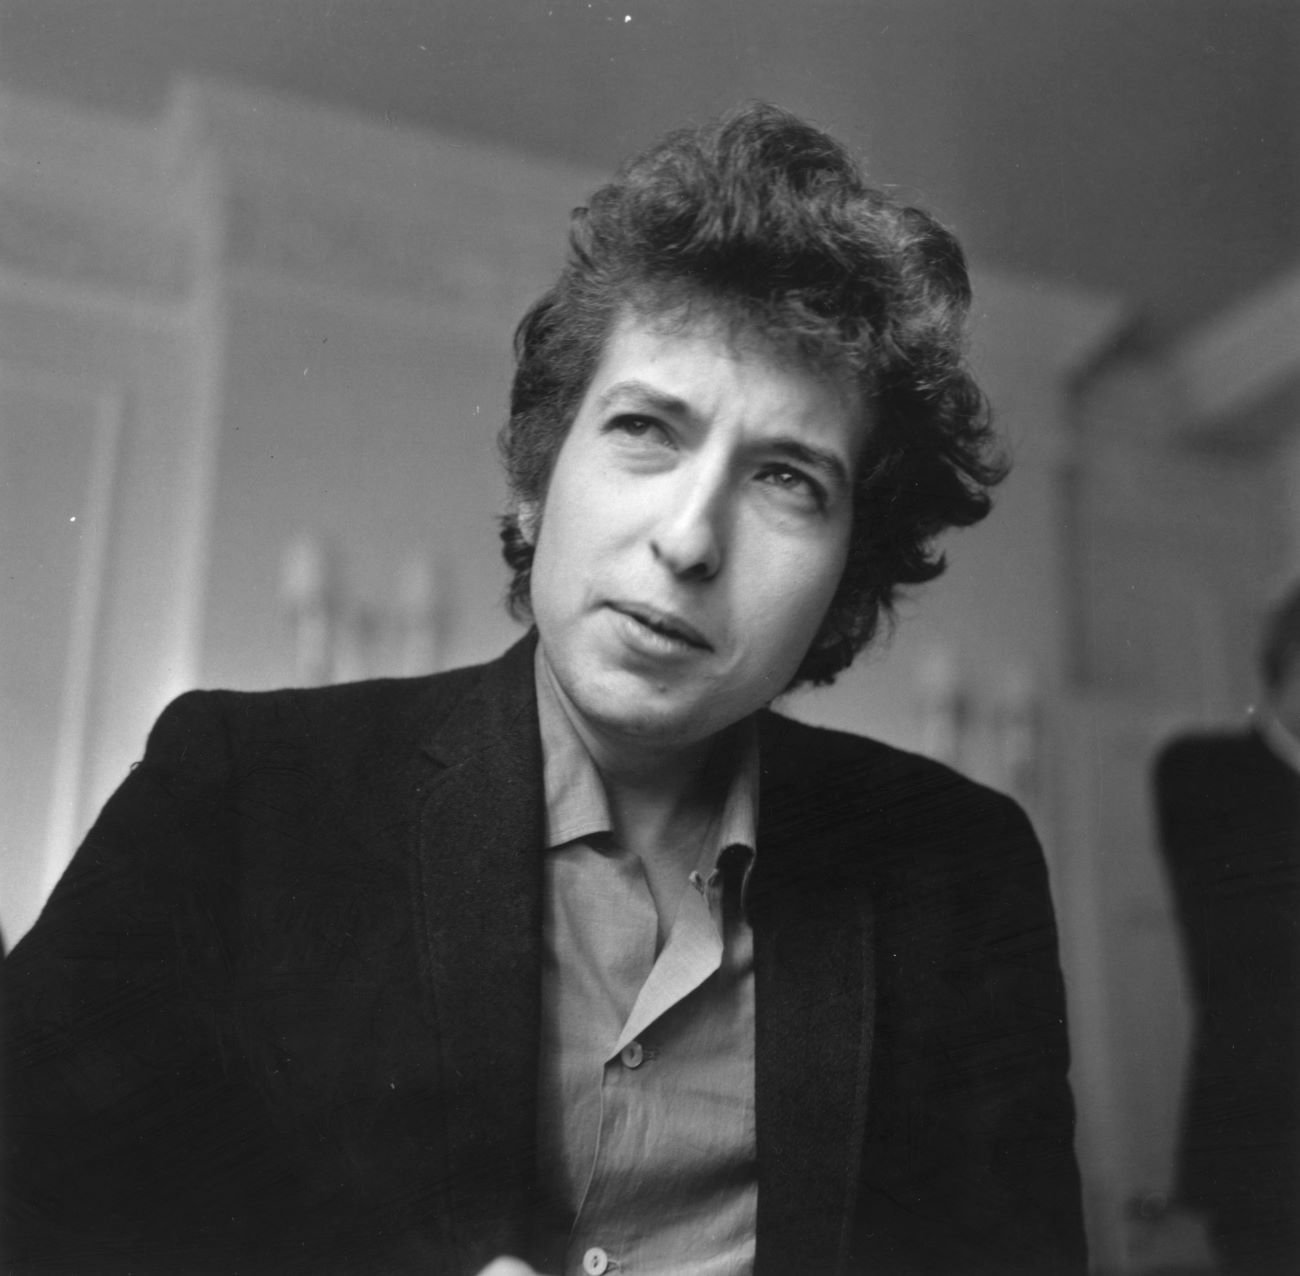 A black and white photo of Bob Dylan in a jacket.